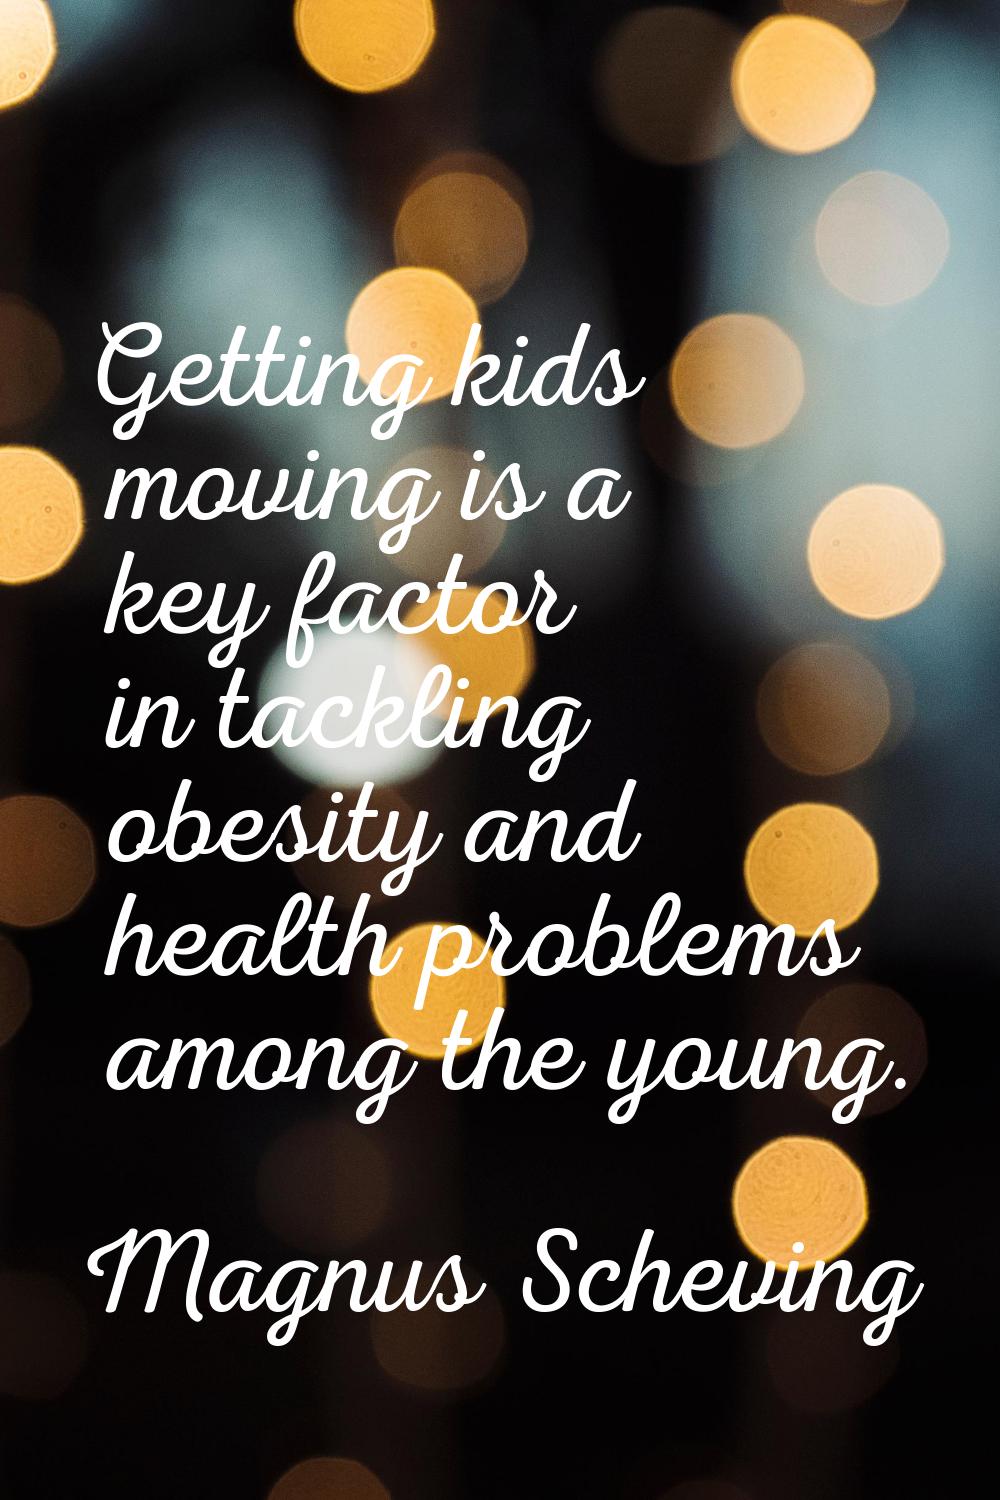 Getting kids moving is a key factor in tackling obesity and health problems among the young.